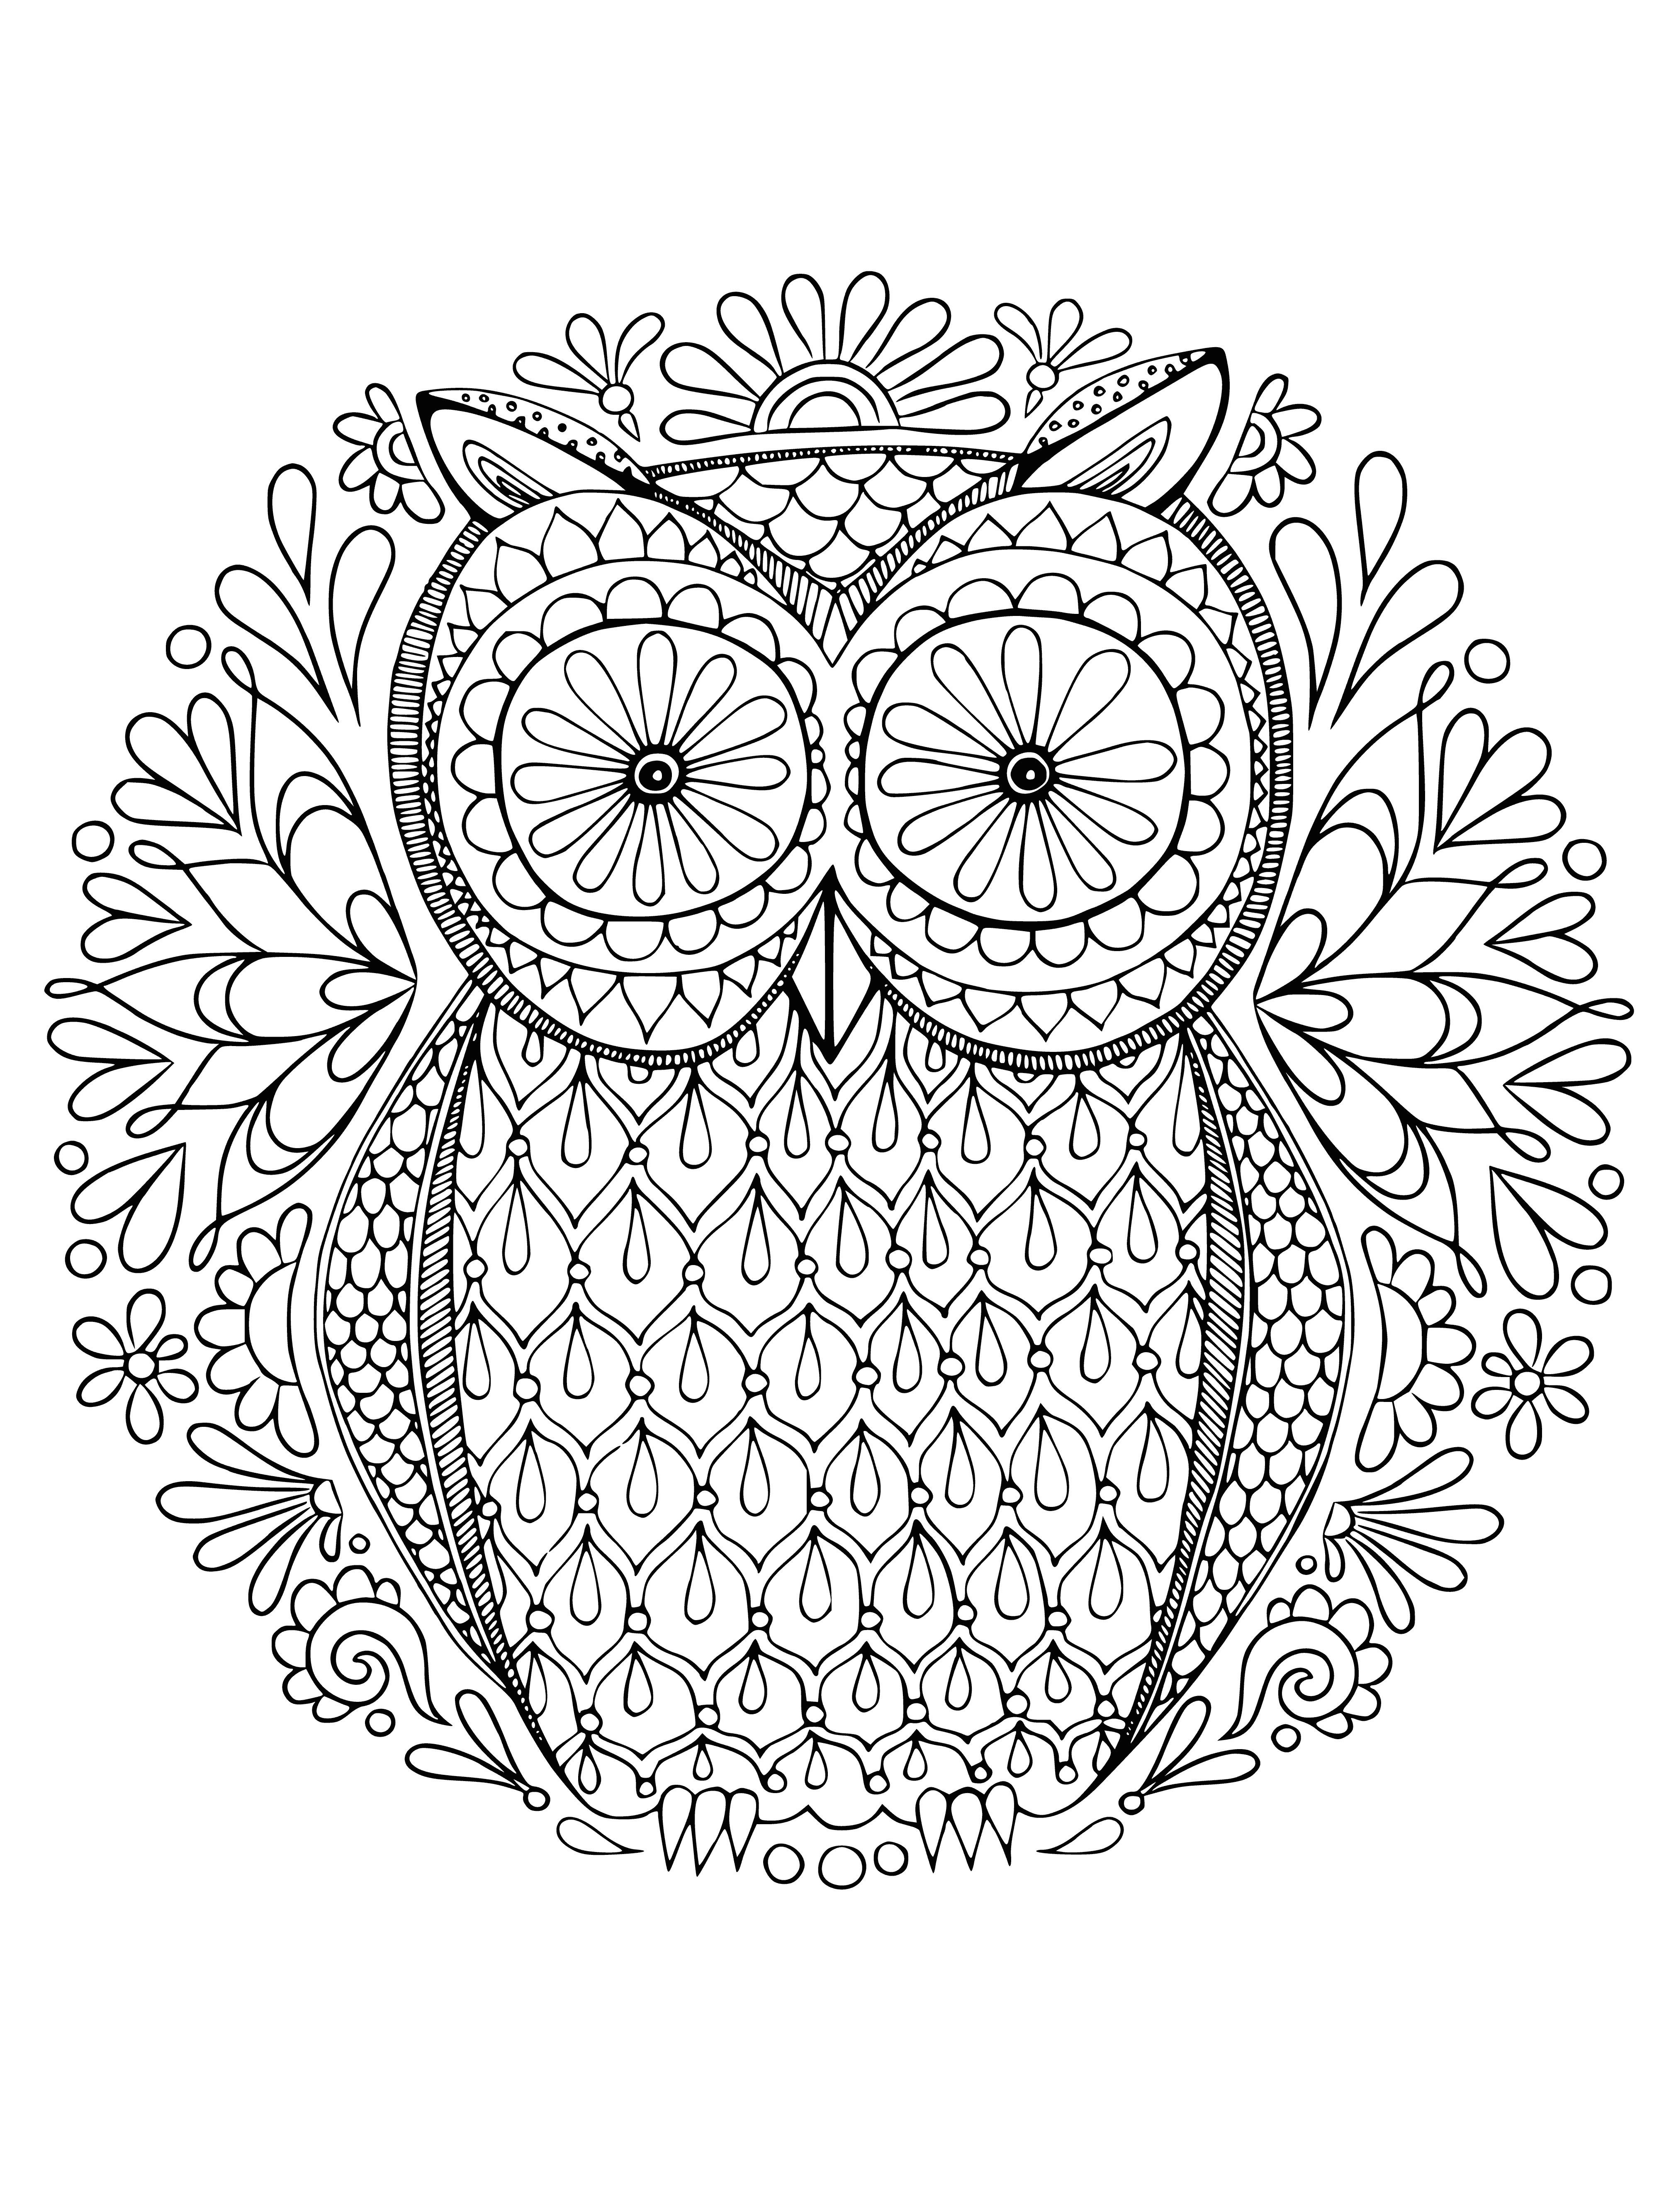 coloring page: Owl mandala coloring page: an owl in center surrounded by intricate patterns for calming & stress-relief.